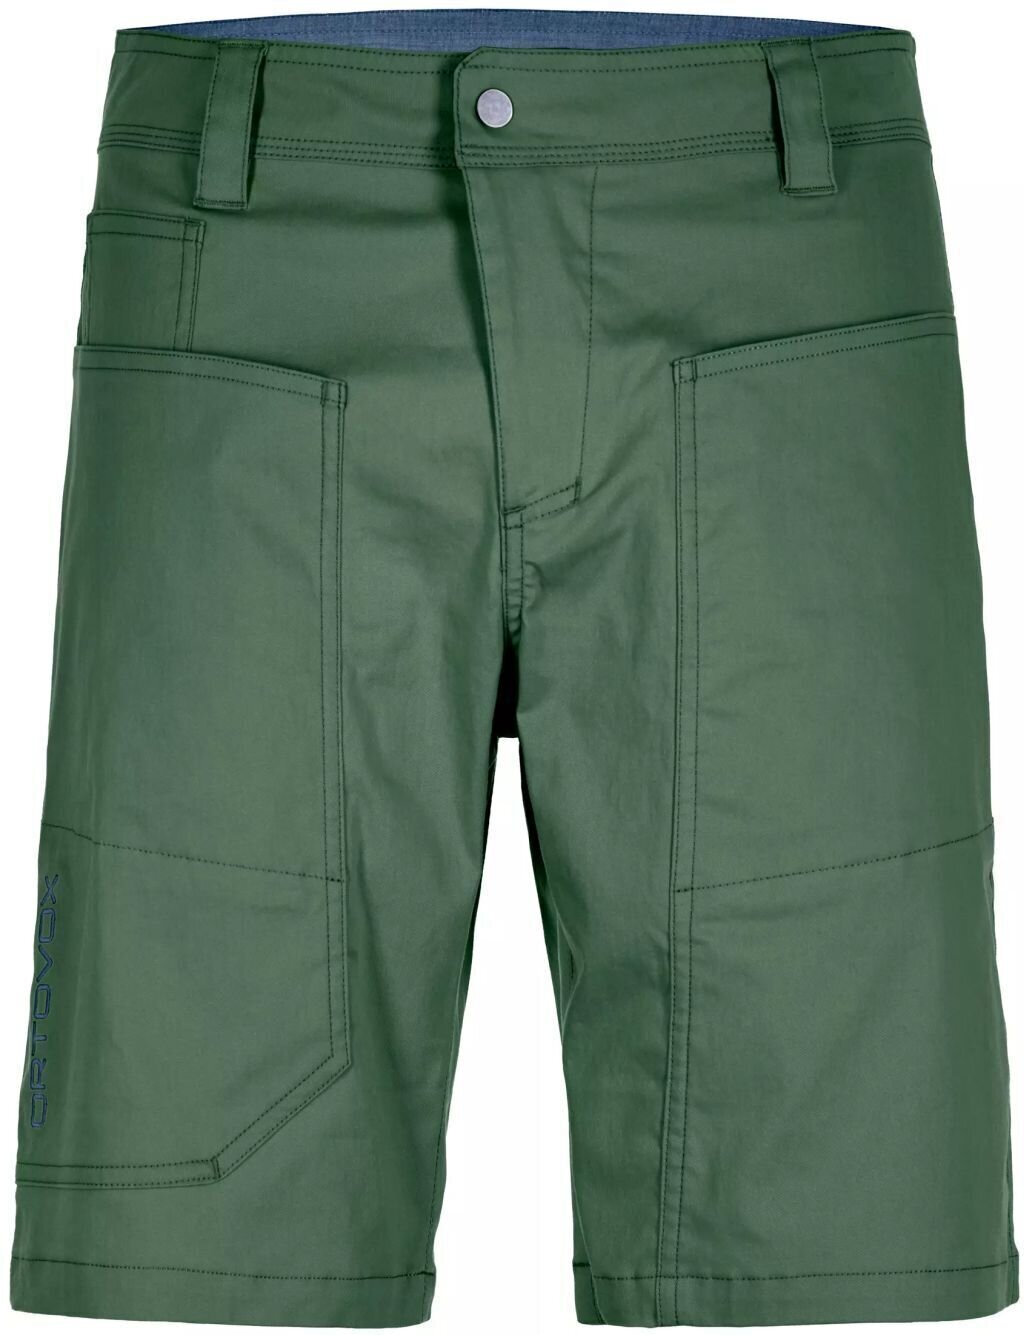 Outdoor Shorts Ortovox Engadin M Green Forest XL Outdoor Shorts